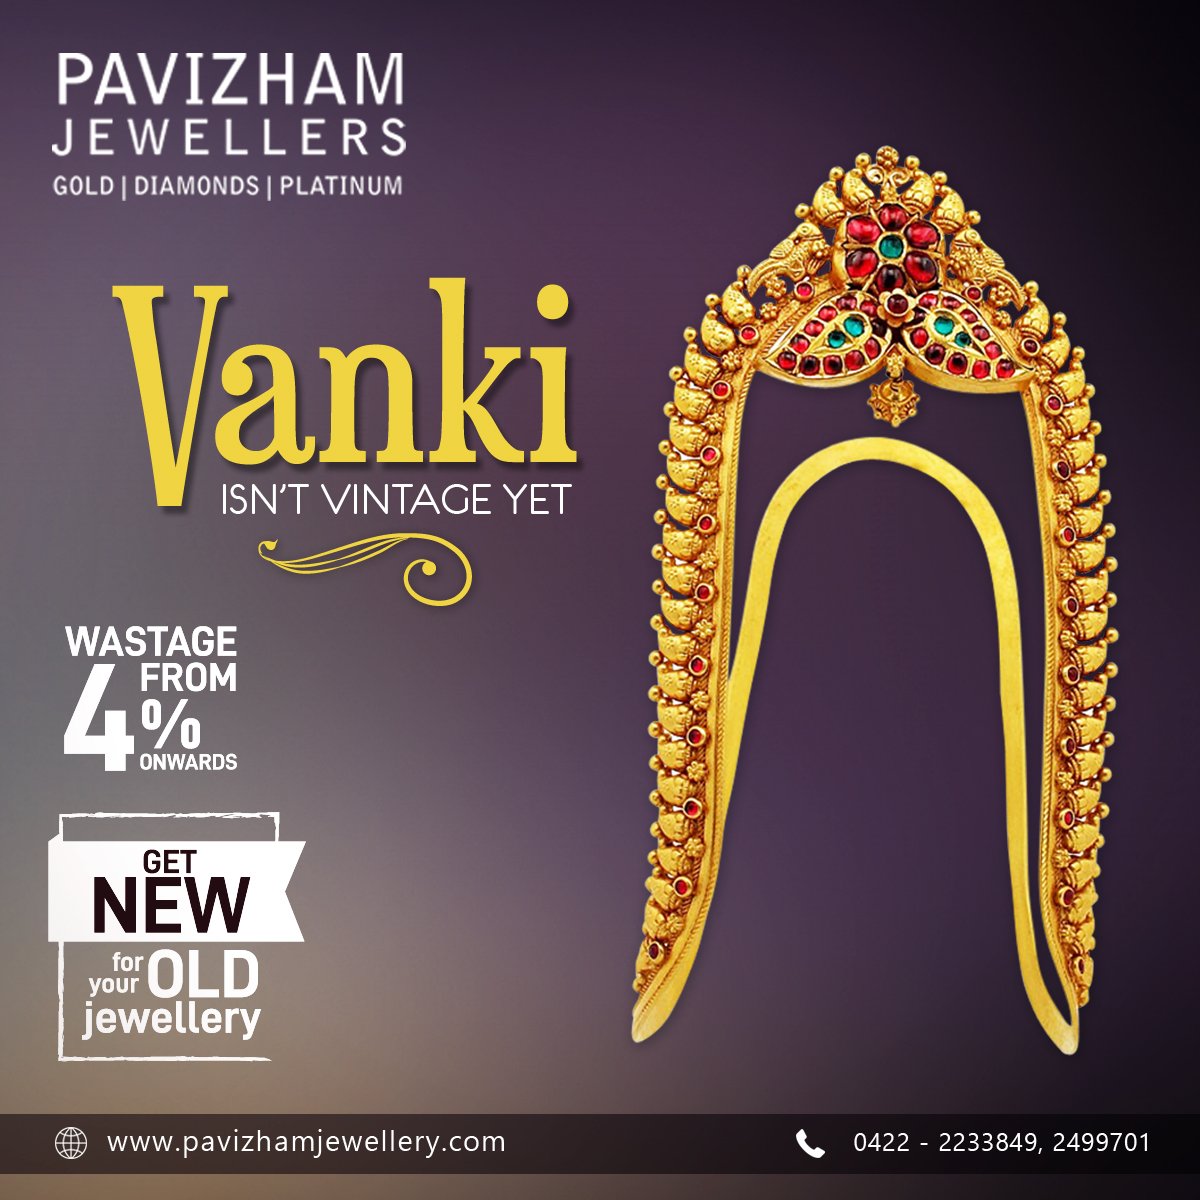 Pick your favourite Vanki at the Pavizham Jewellers.Visit & get to know more  pavizhamjewellery.com/index.html and pick your favourite collections.
#pavizham #coimbatore #jewellery #jewelleryshop #instajewels #handmade #fashion #unique #trendy #instagold #silver #diamond #necklace #beads